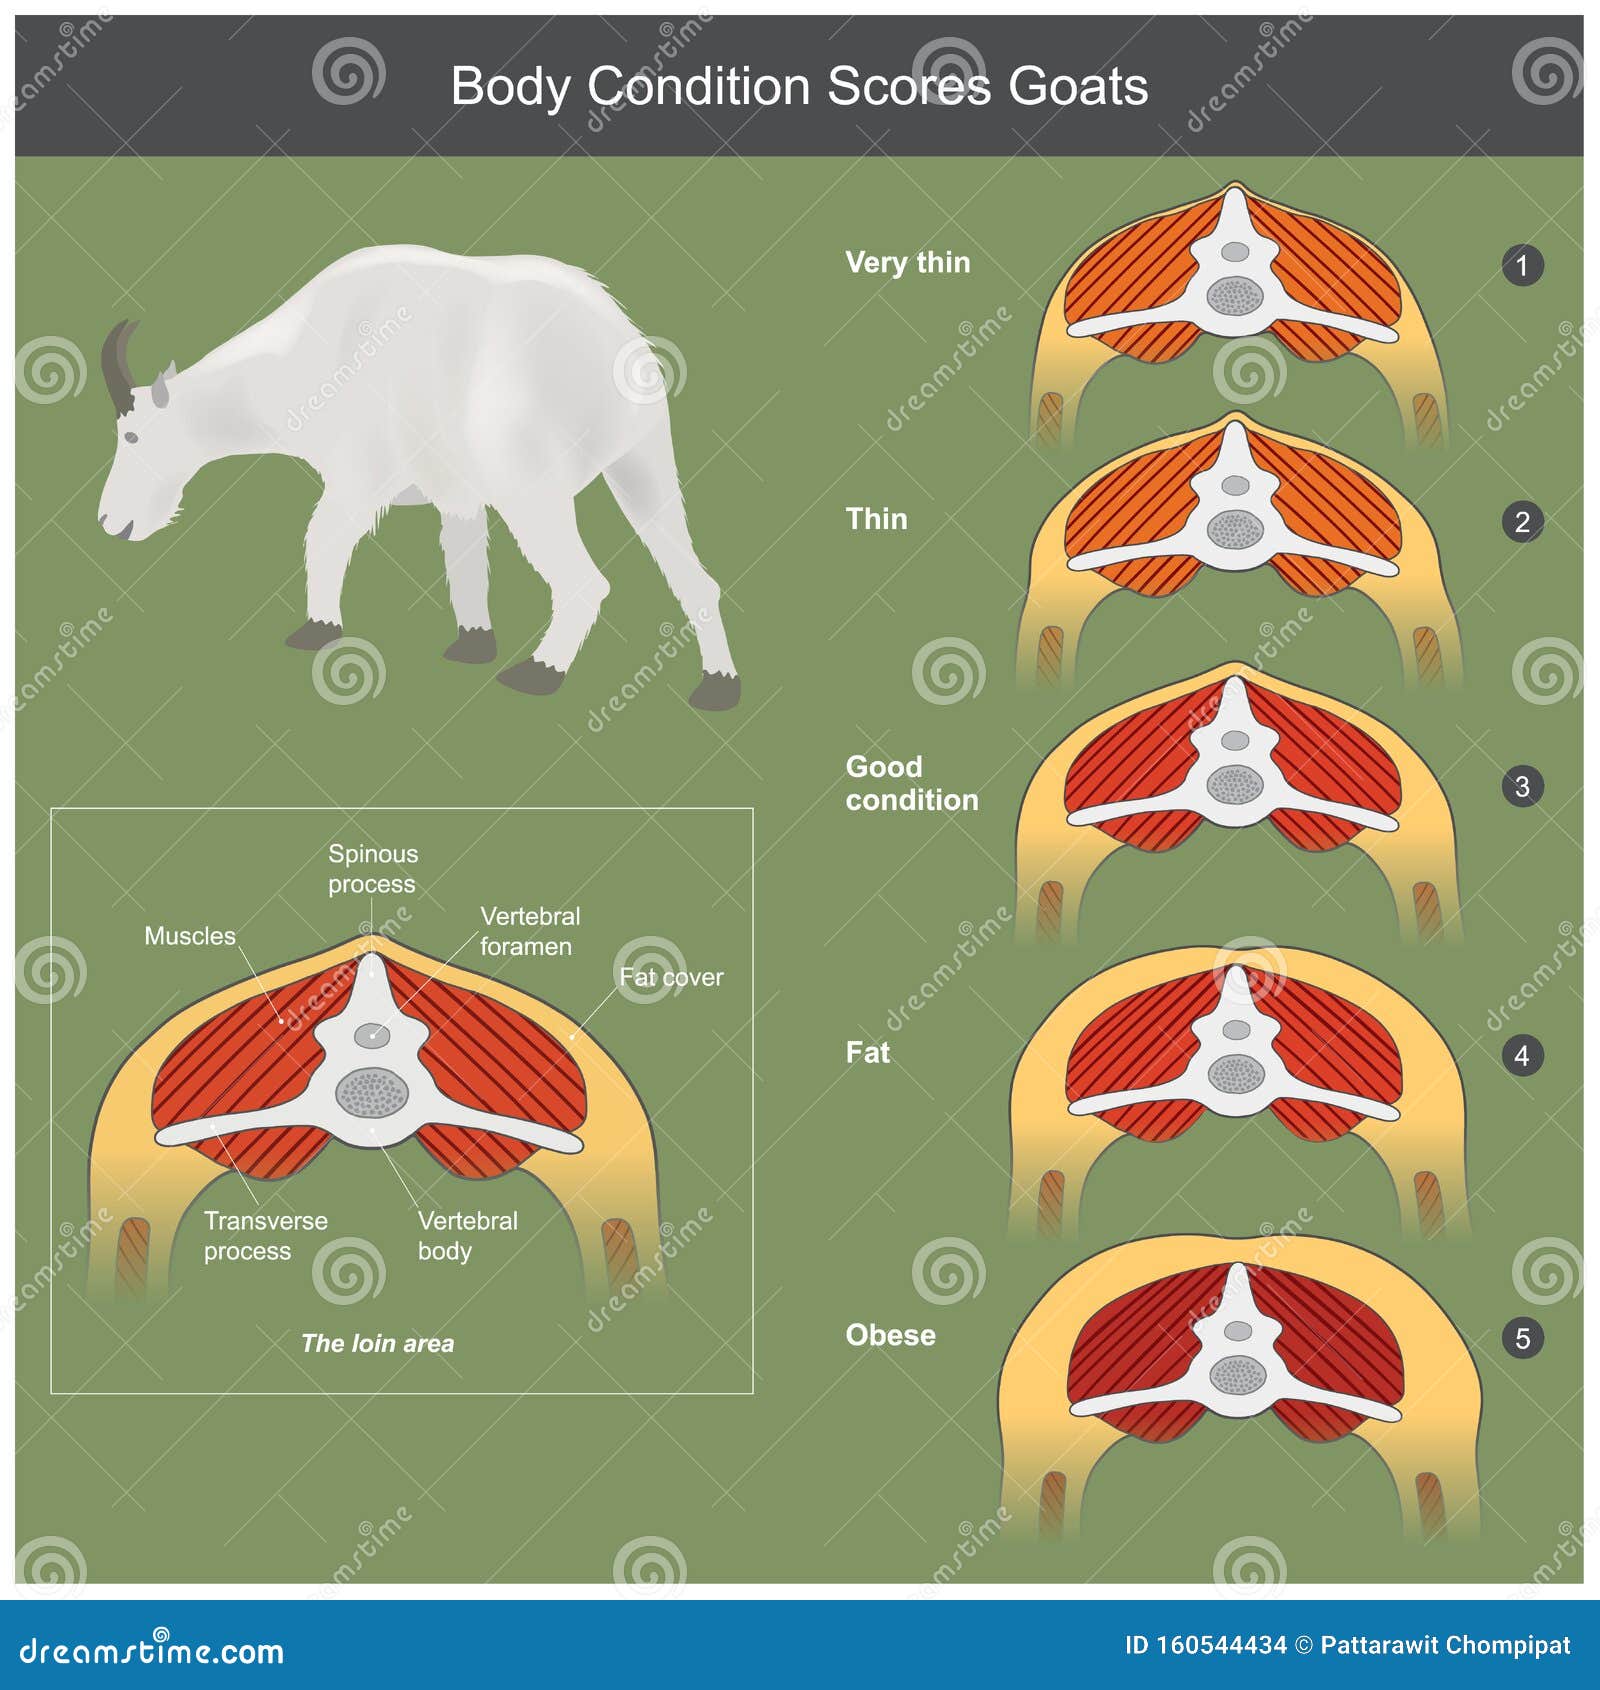 the scoring body and structure loin area of goats